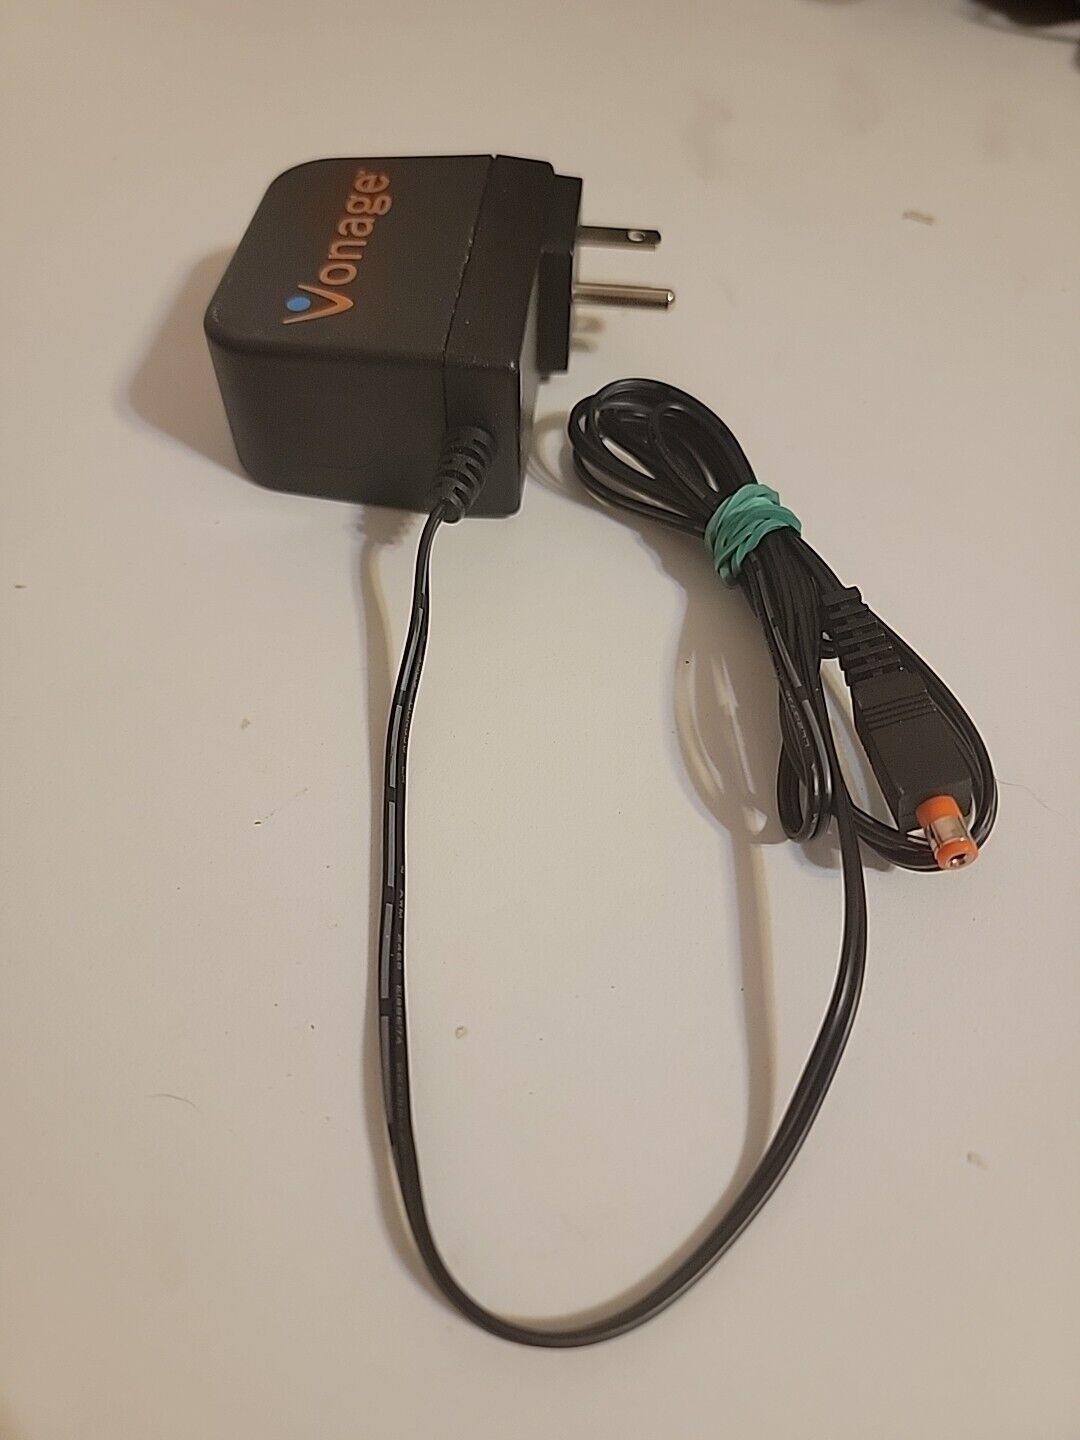 Vonage DVE DSA-18W-12 US1 120180 AC Switching Adapter Power Cord 12V 1.5A DC